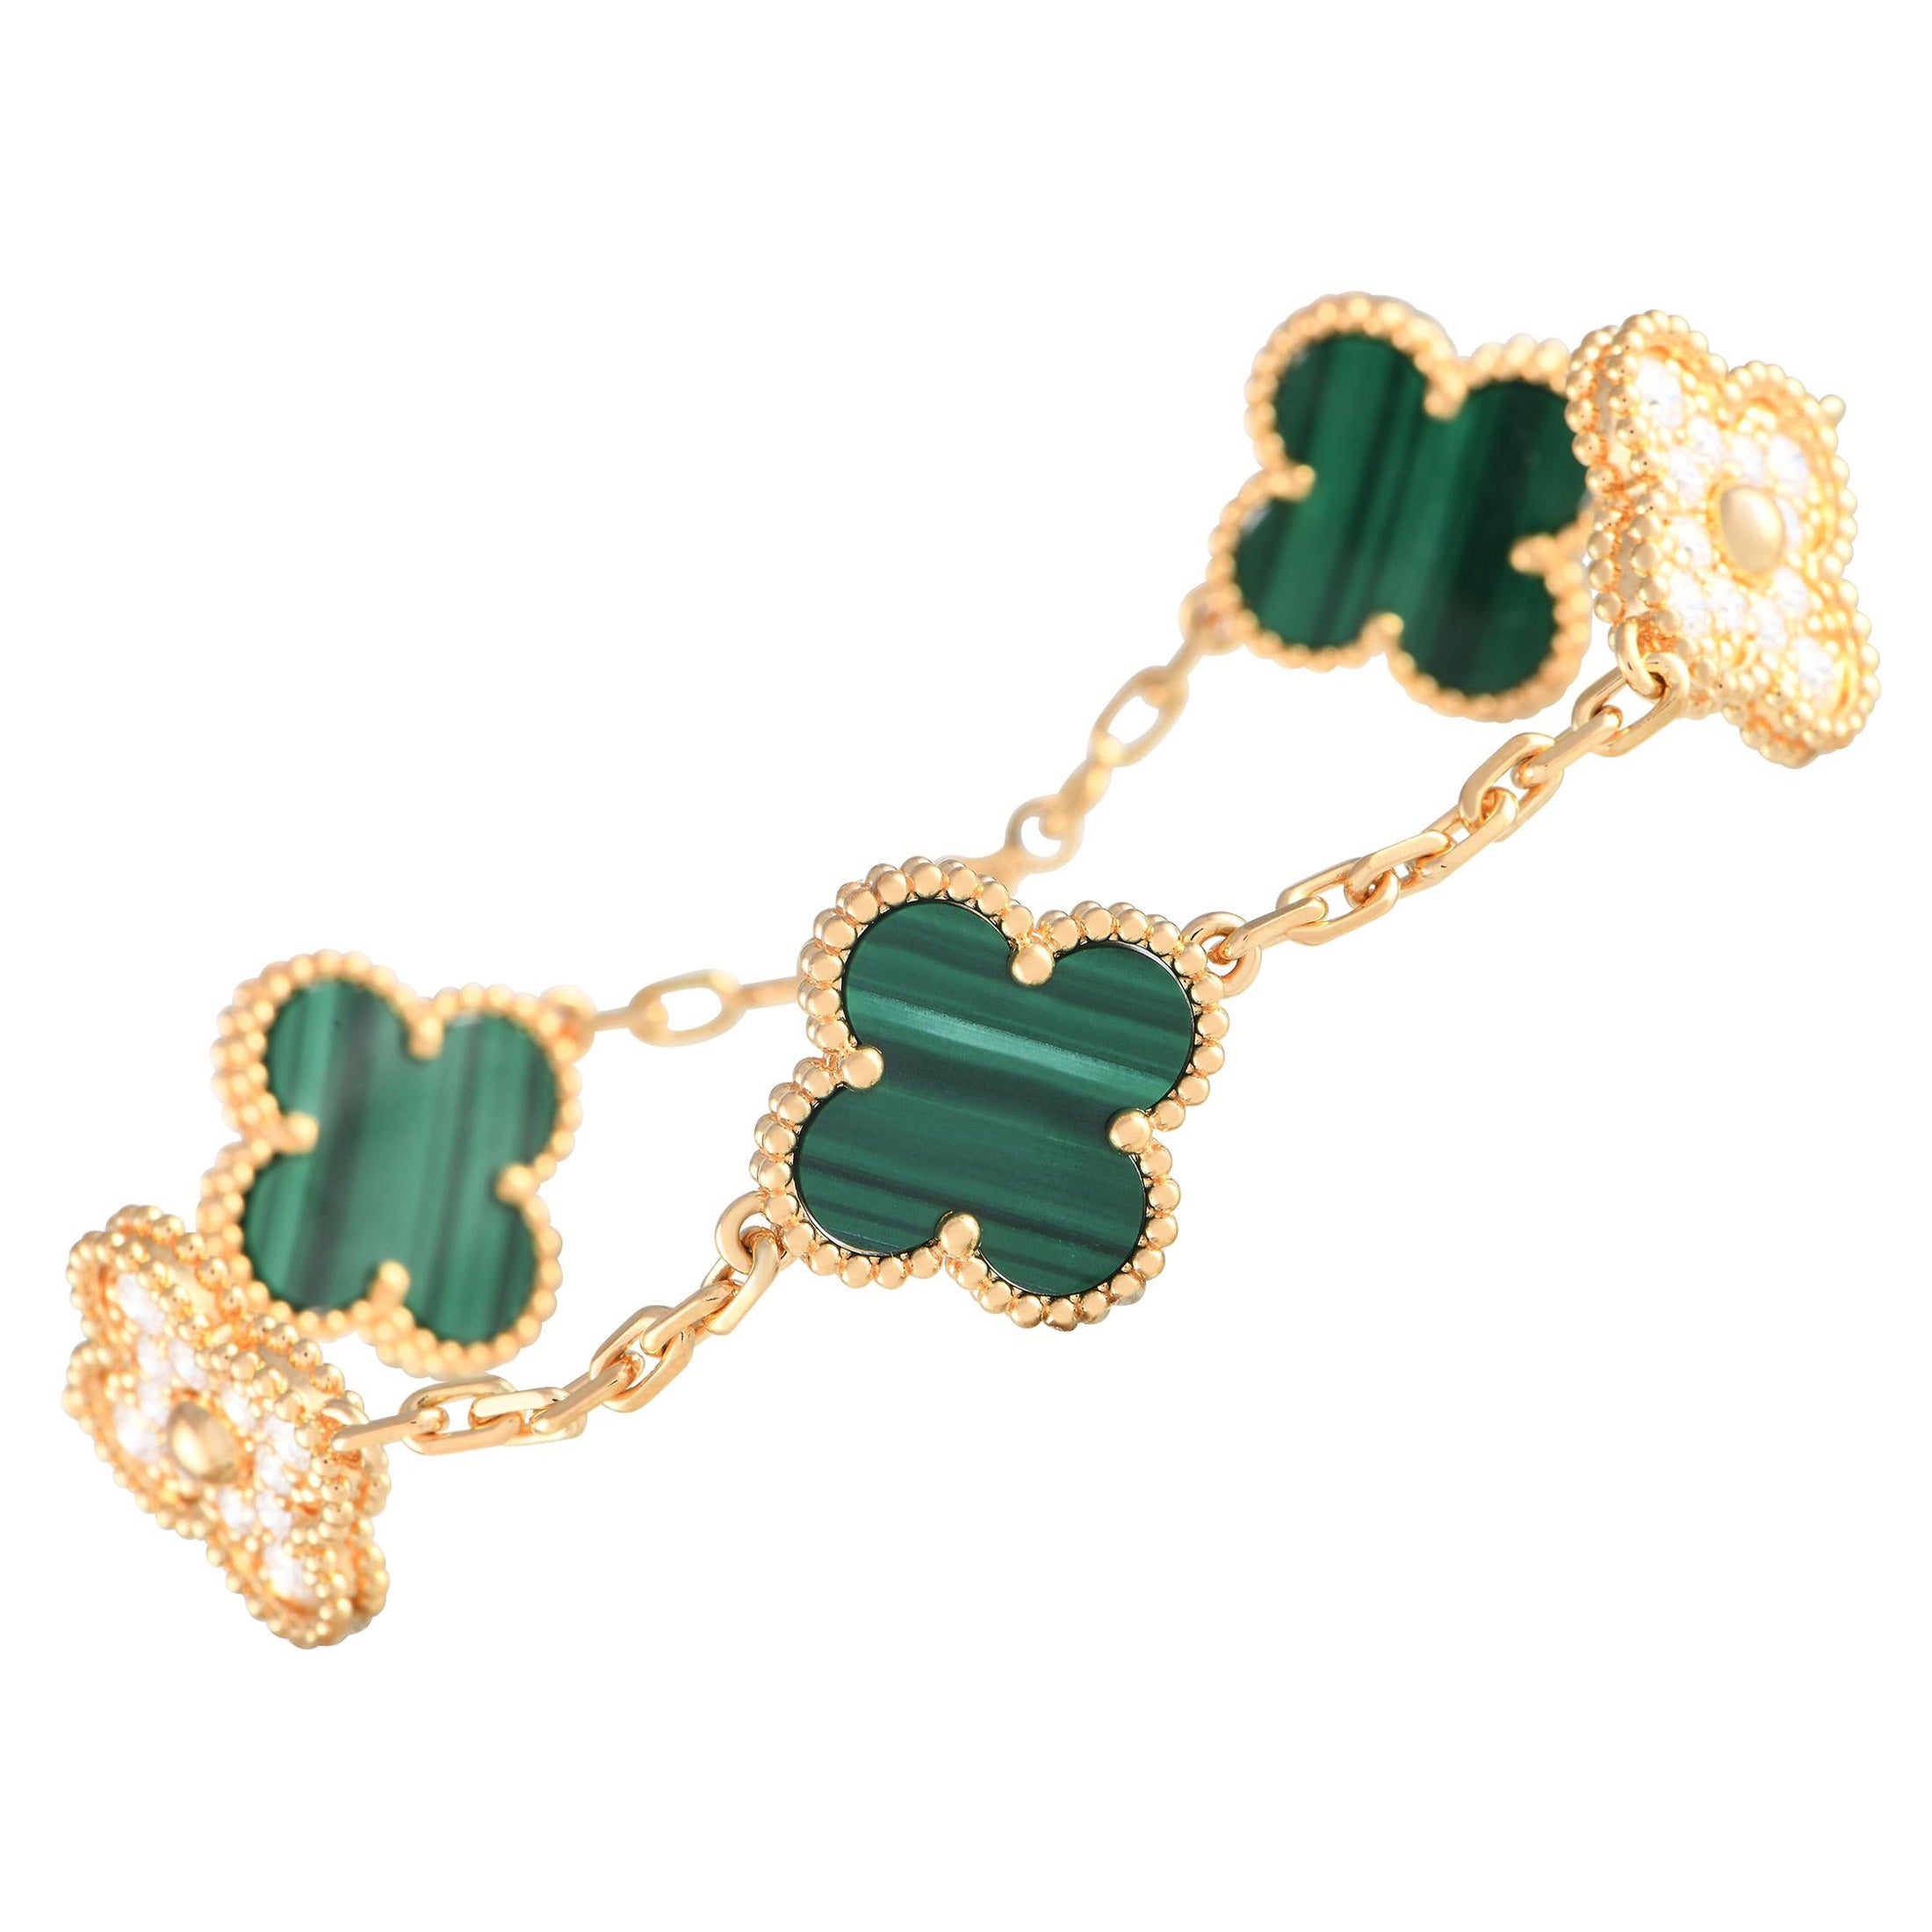 What is the green stone on Van Cleef & Arpels jewelry?